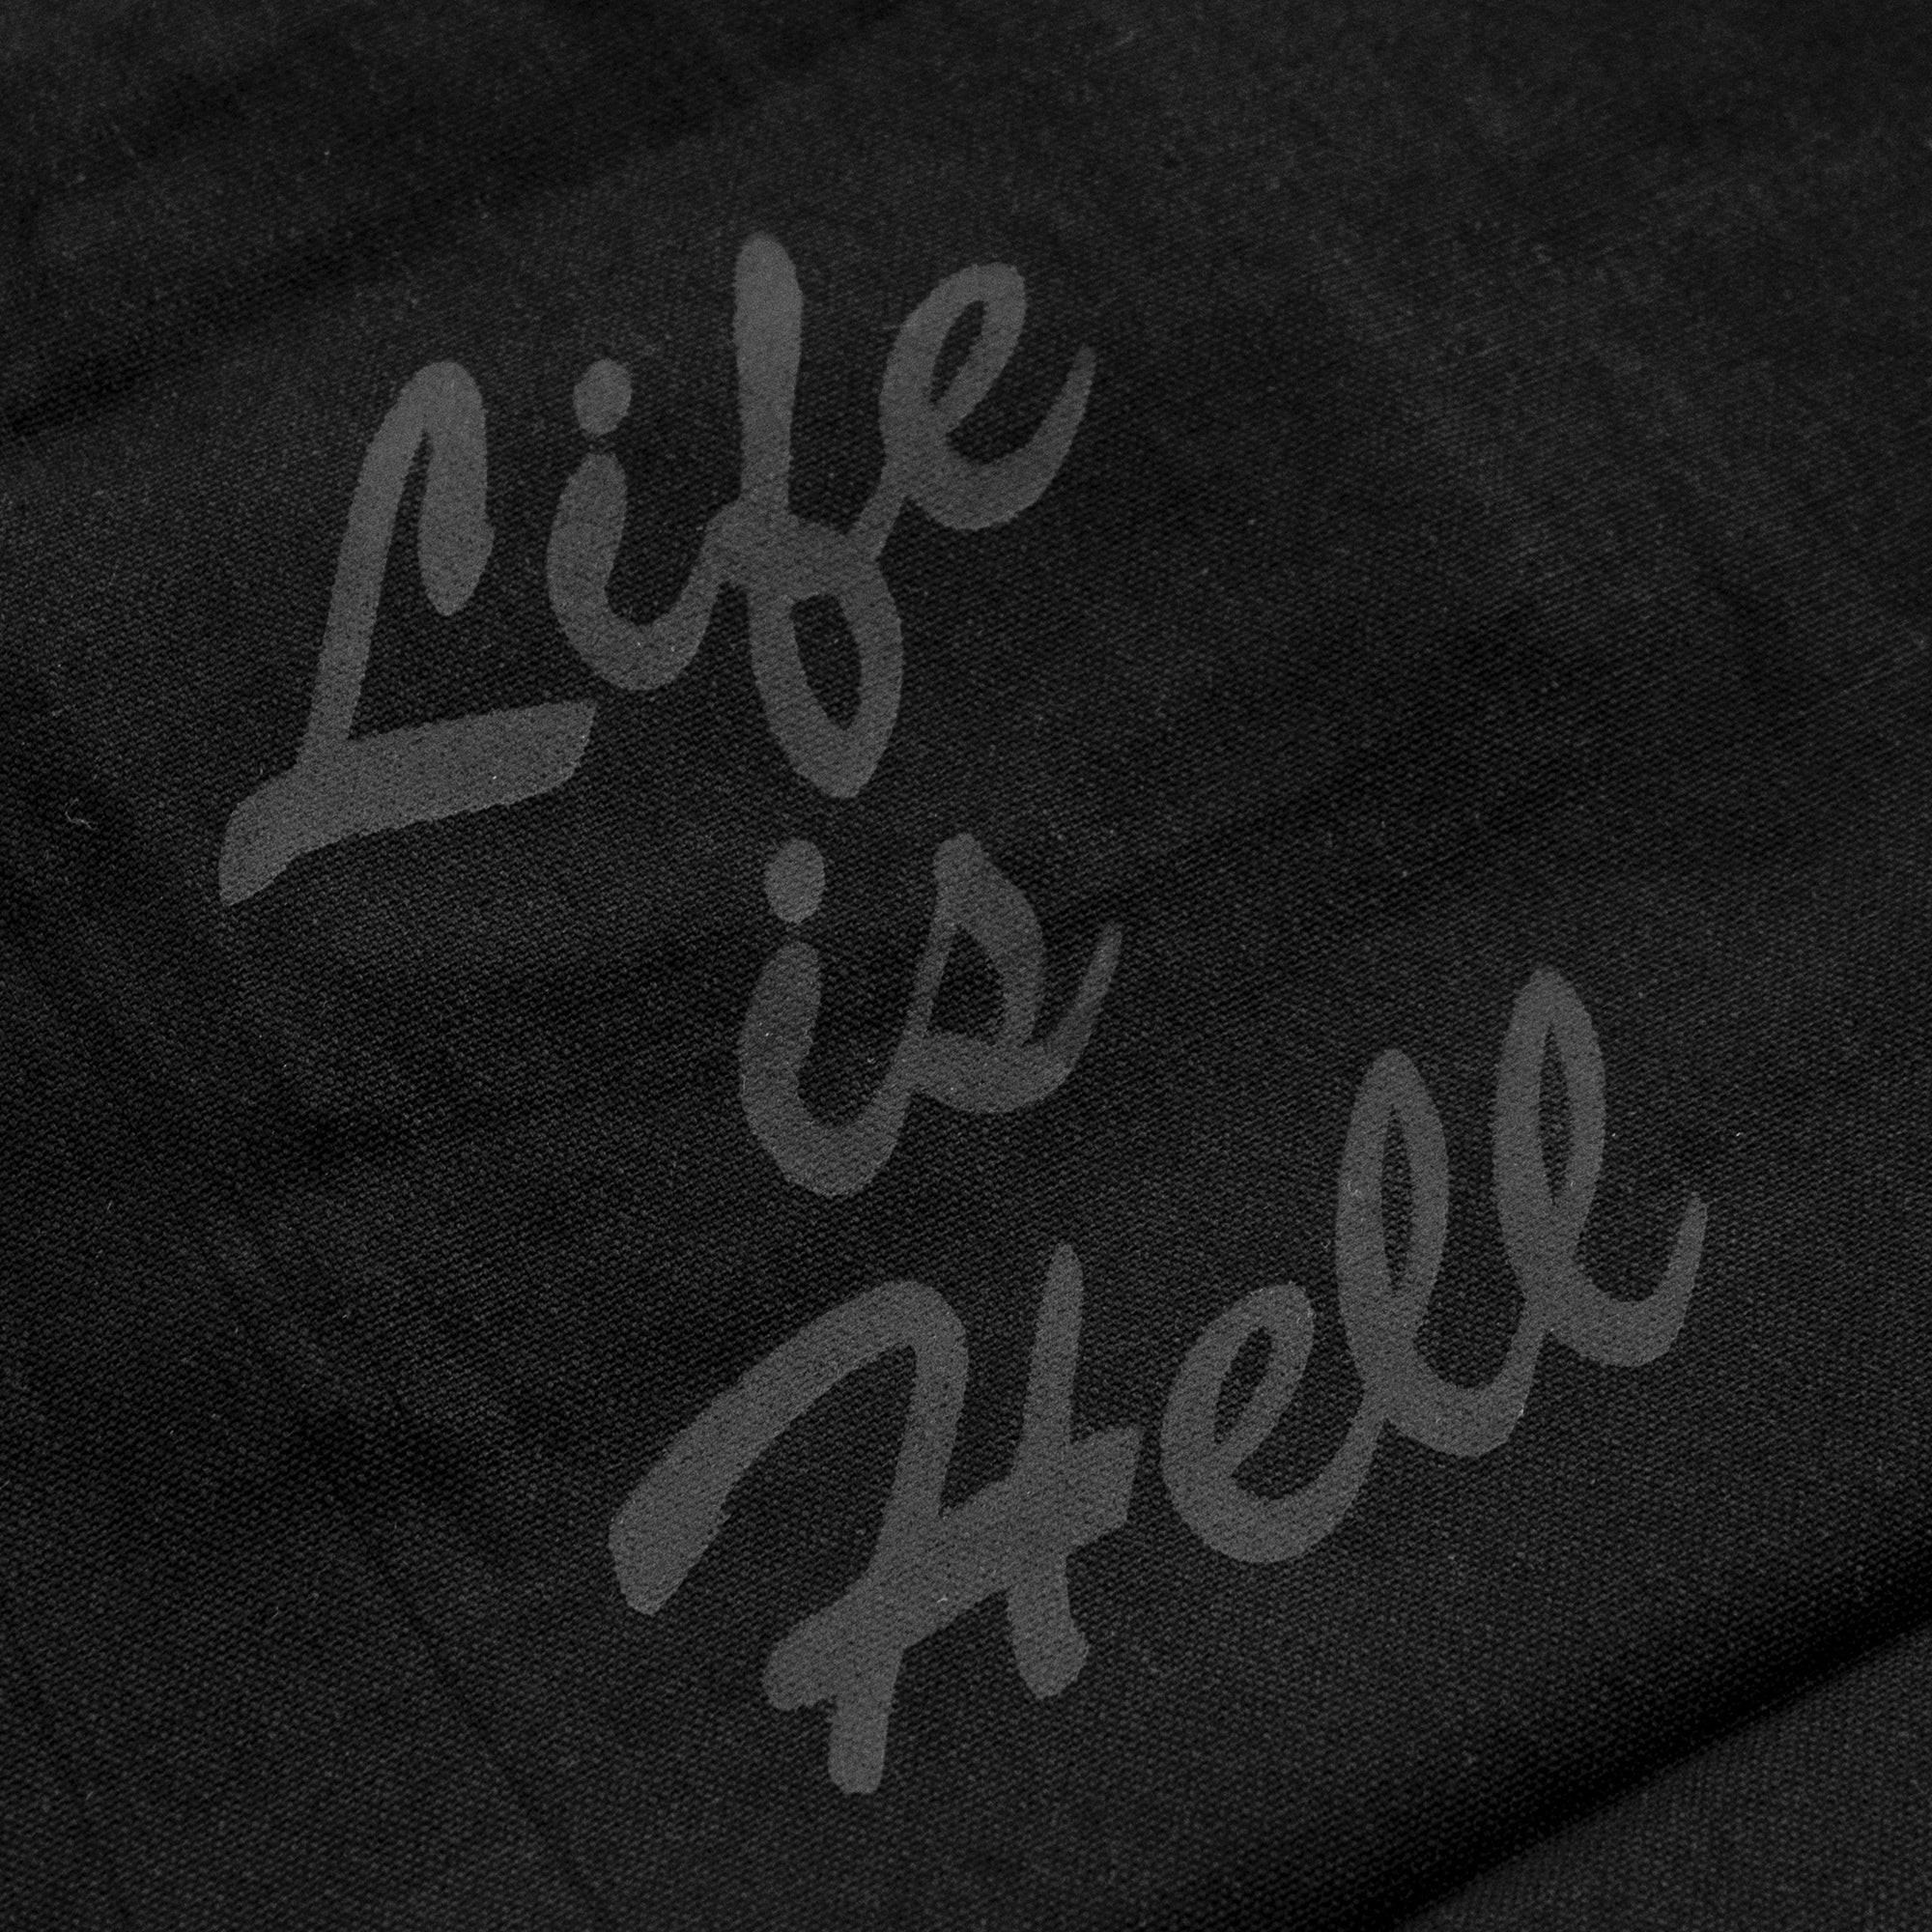 Detail of the "Life is Hell" text on a zippered tote bag.